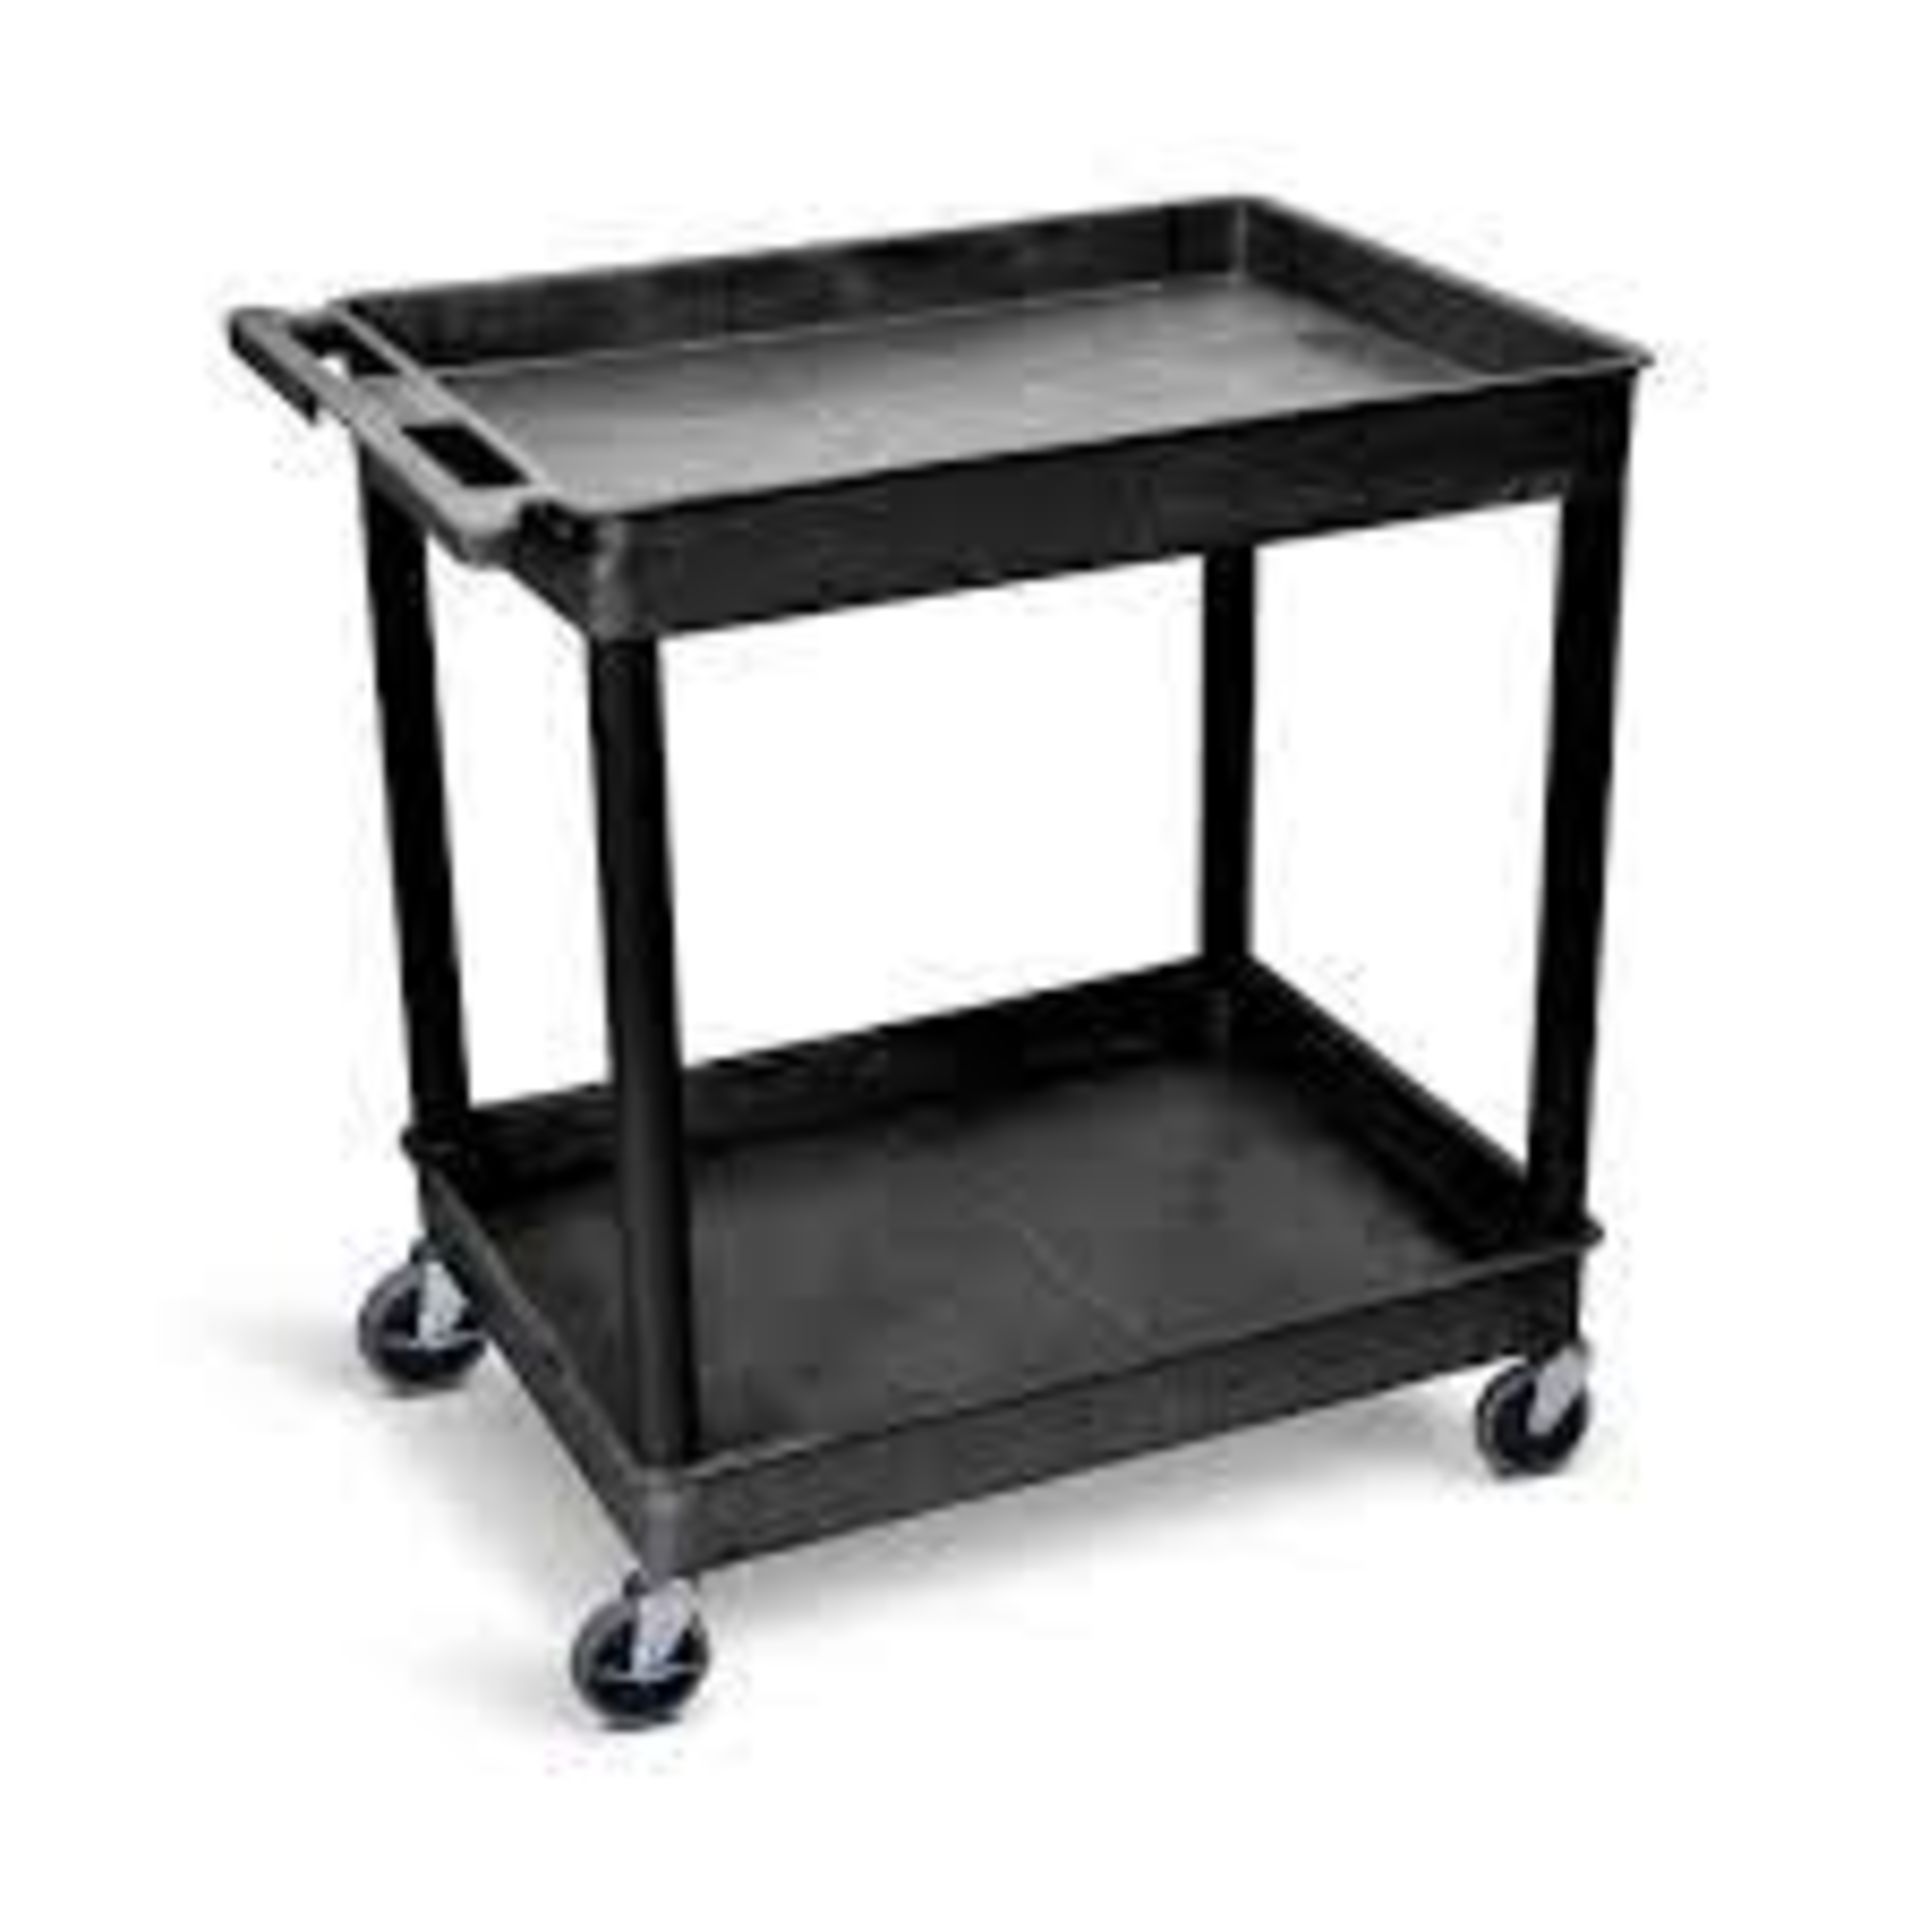 BRAND NEW LUXOR PORTABLE TOOL TROLLEY RRP £289 R17-7